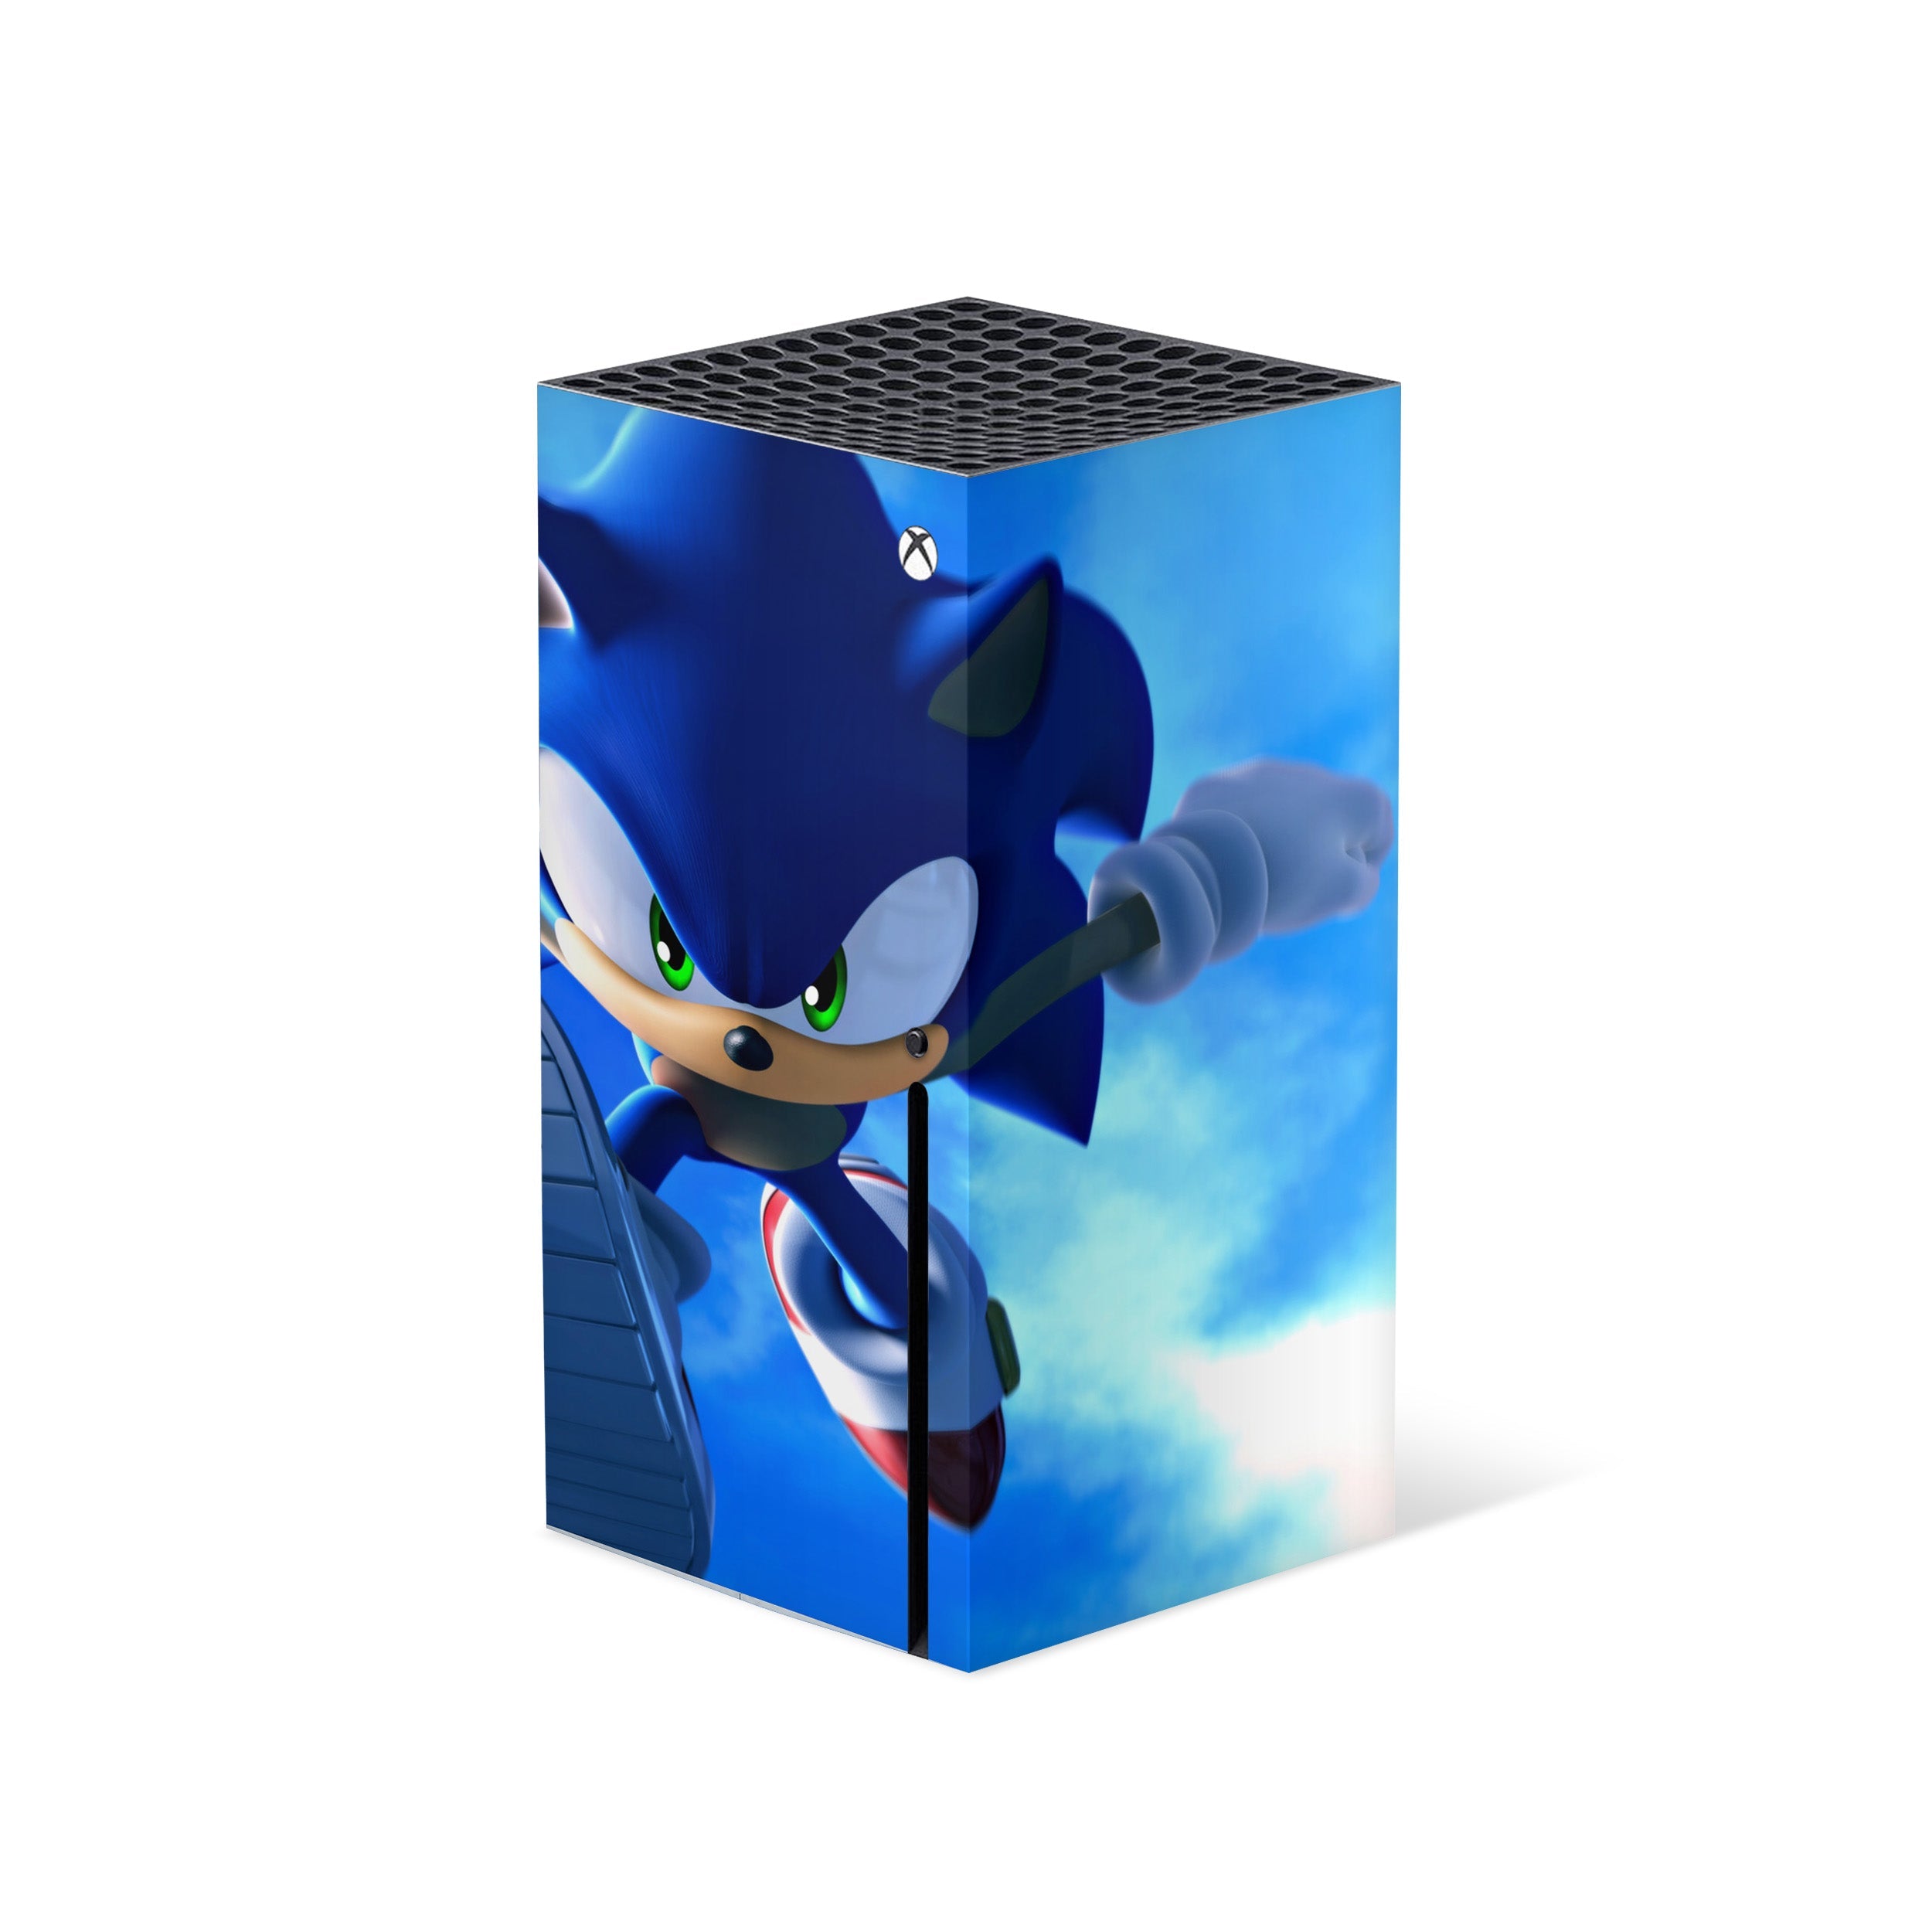 A video game skin featuring a Sonic The Hedgehog design for the Xbox Series X.